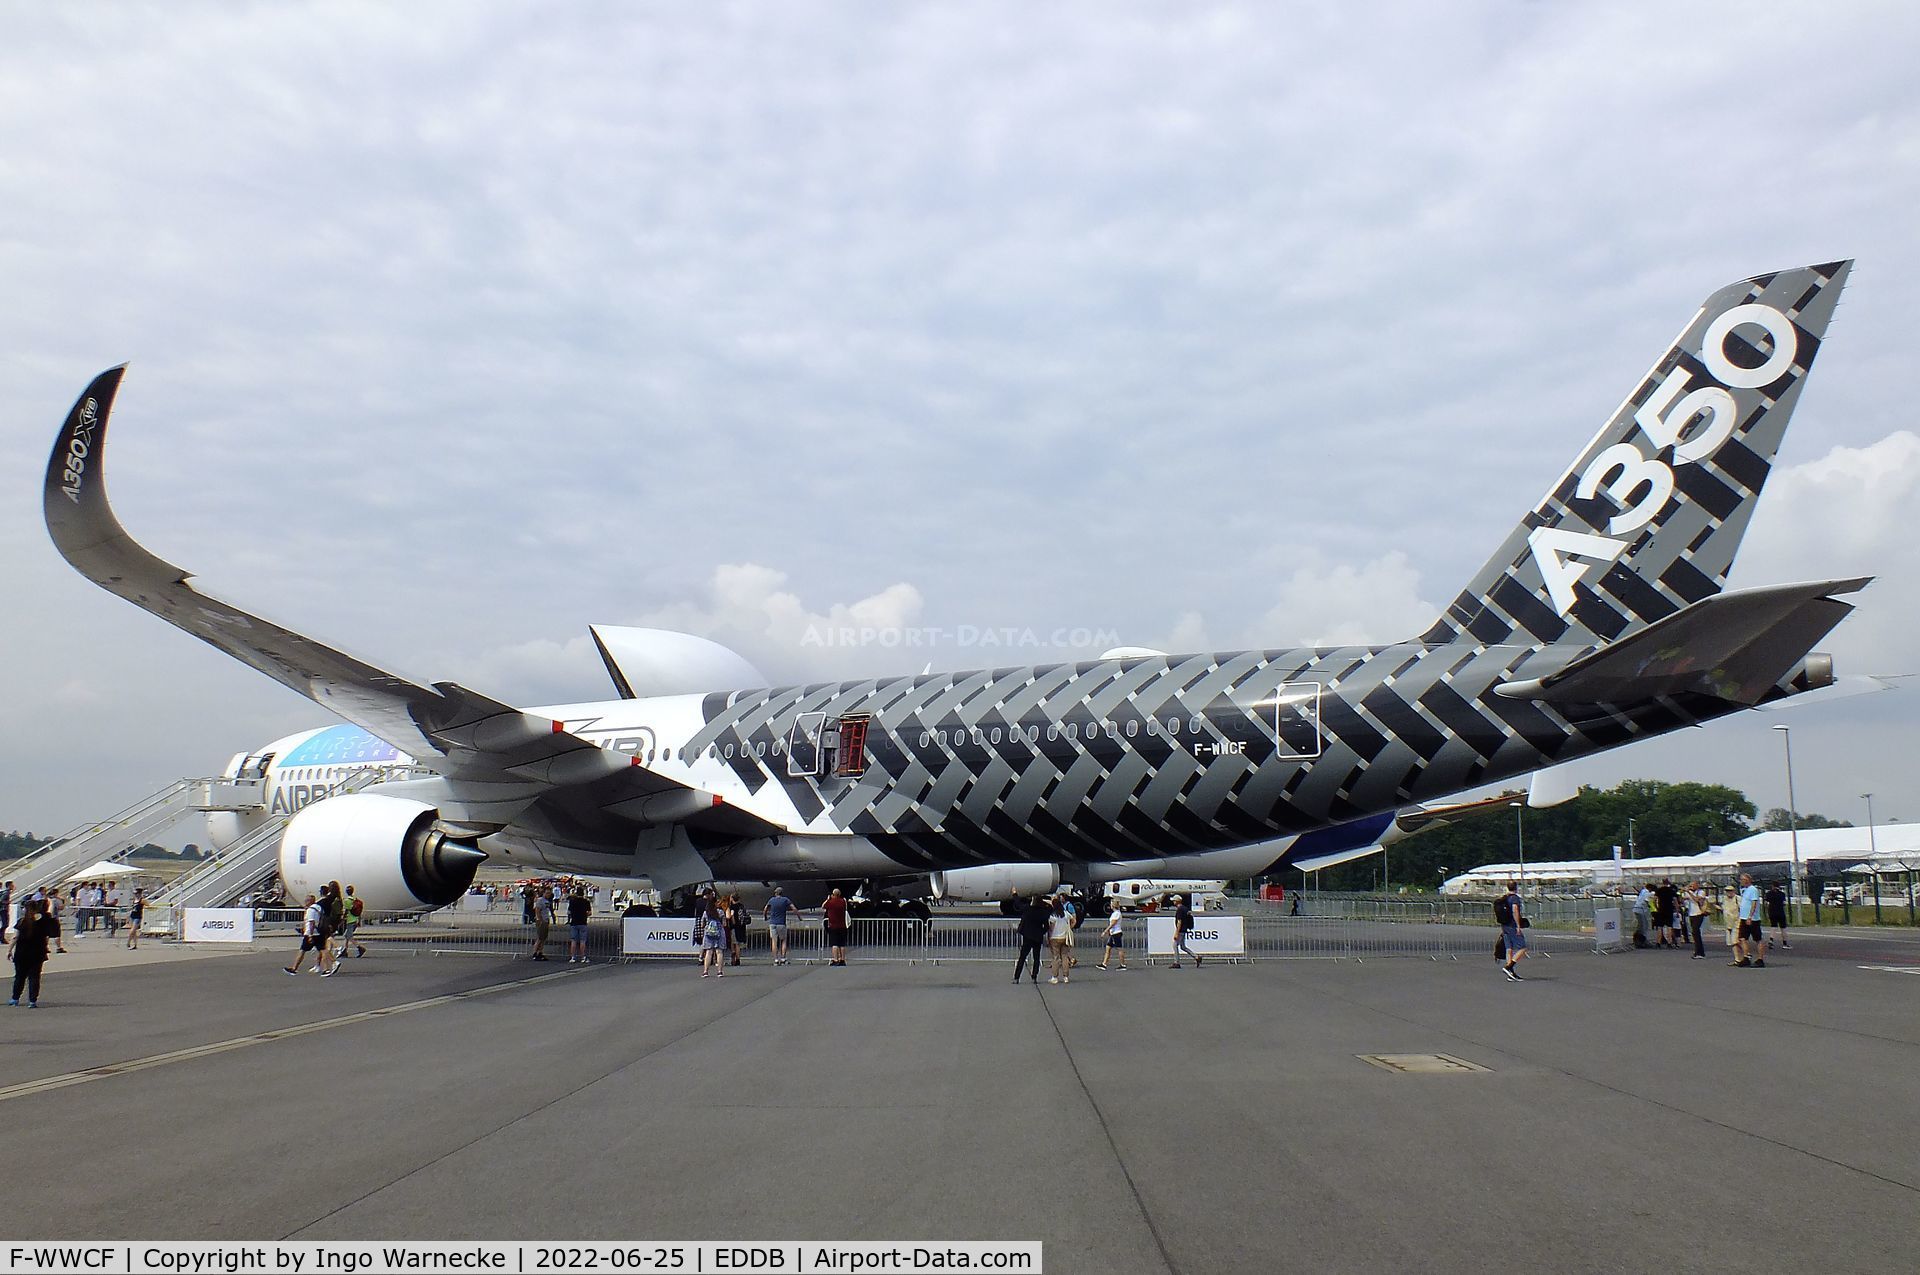 F-WWCF, 2013 Airbus A350-941 C/N 002, Airbus A350-941 Airspace Explorer (cabin technology demonstrator) at ILA 2022, Berlin